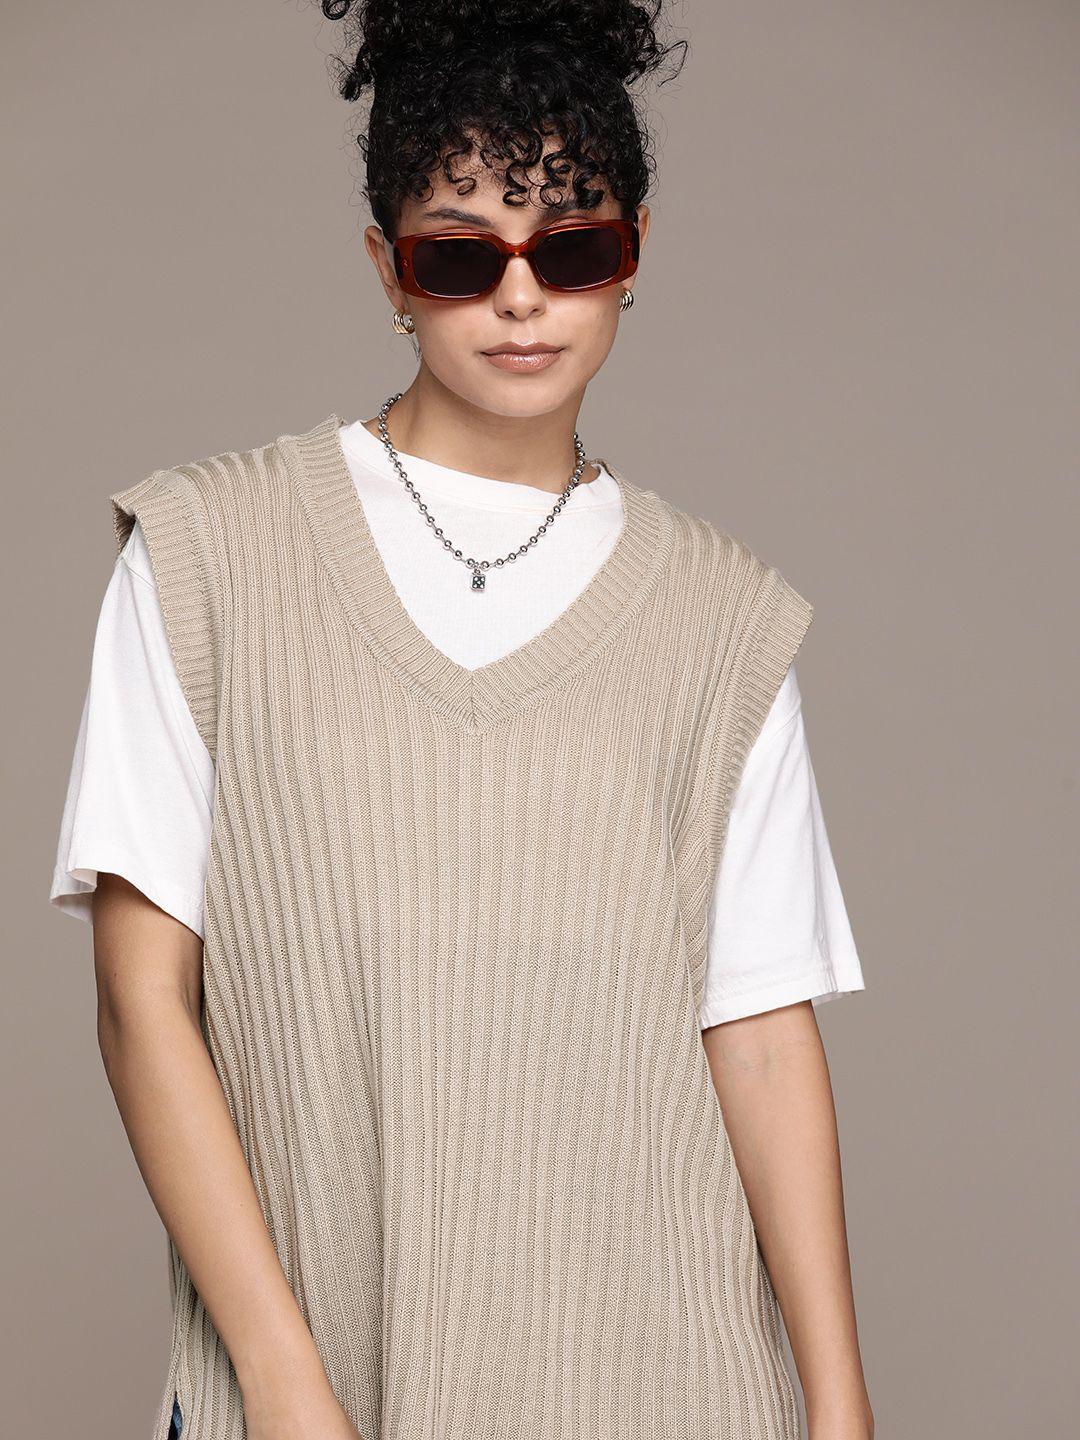 the roadster lifestyle co. ribbed acrylic sweater vest